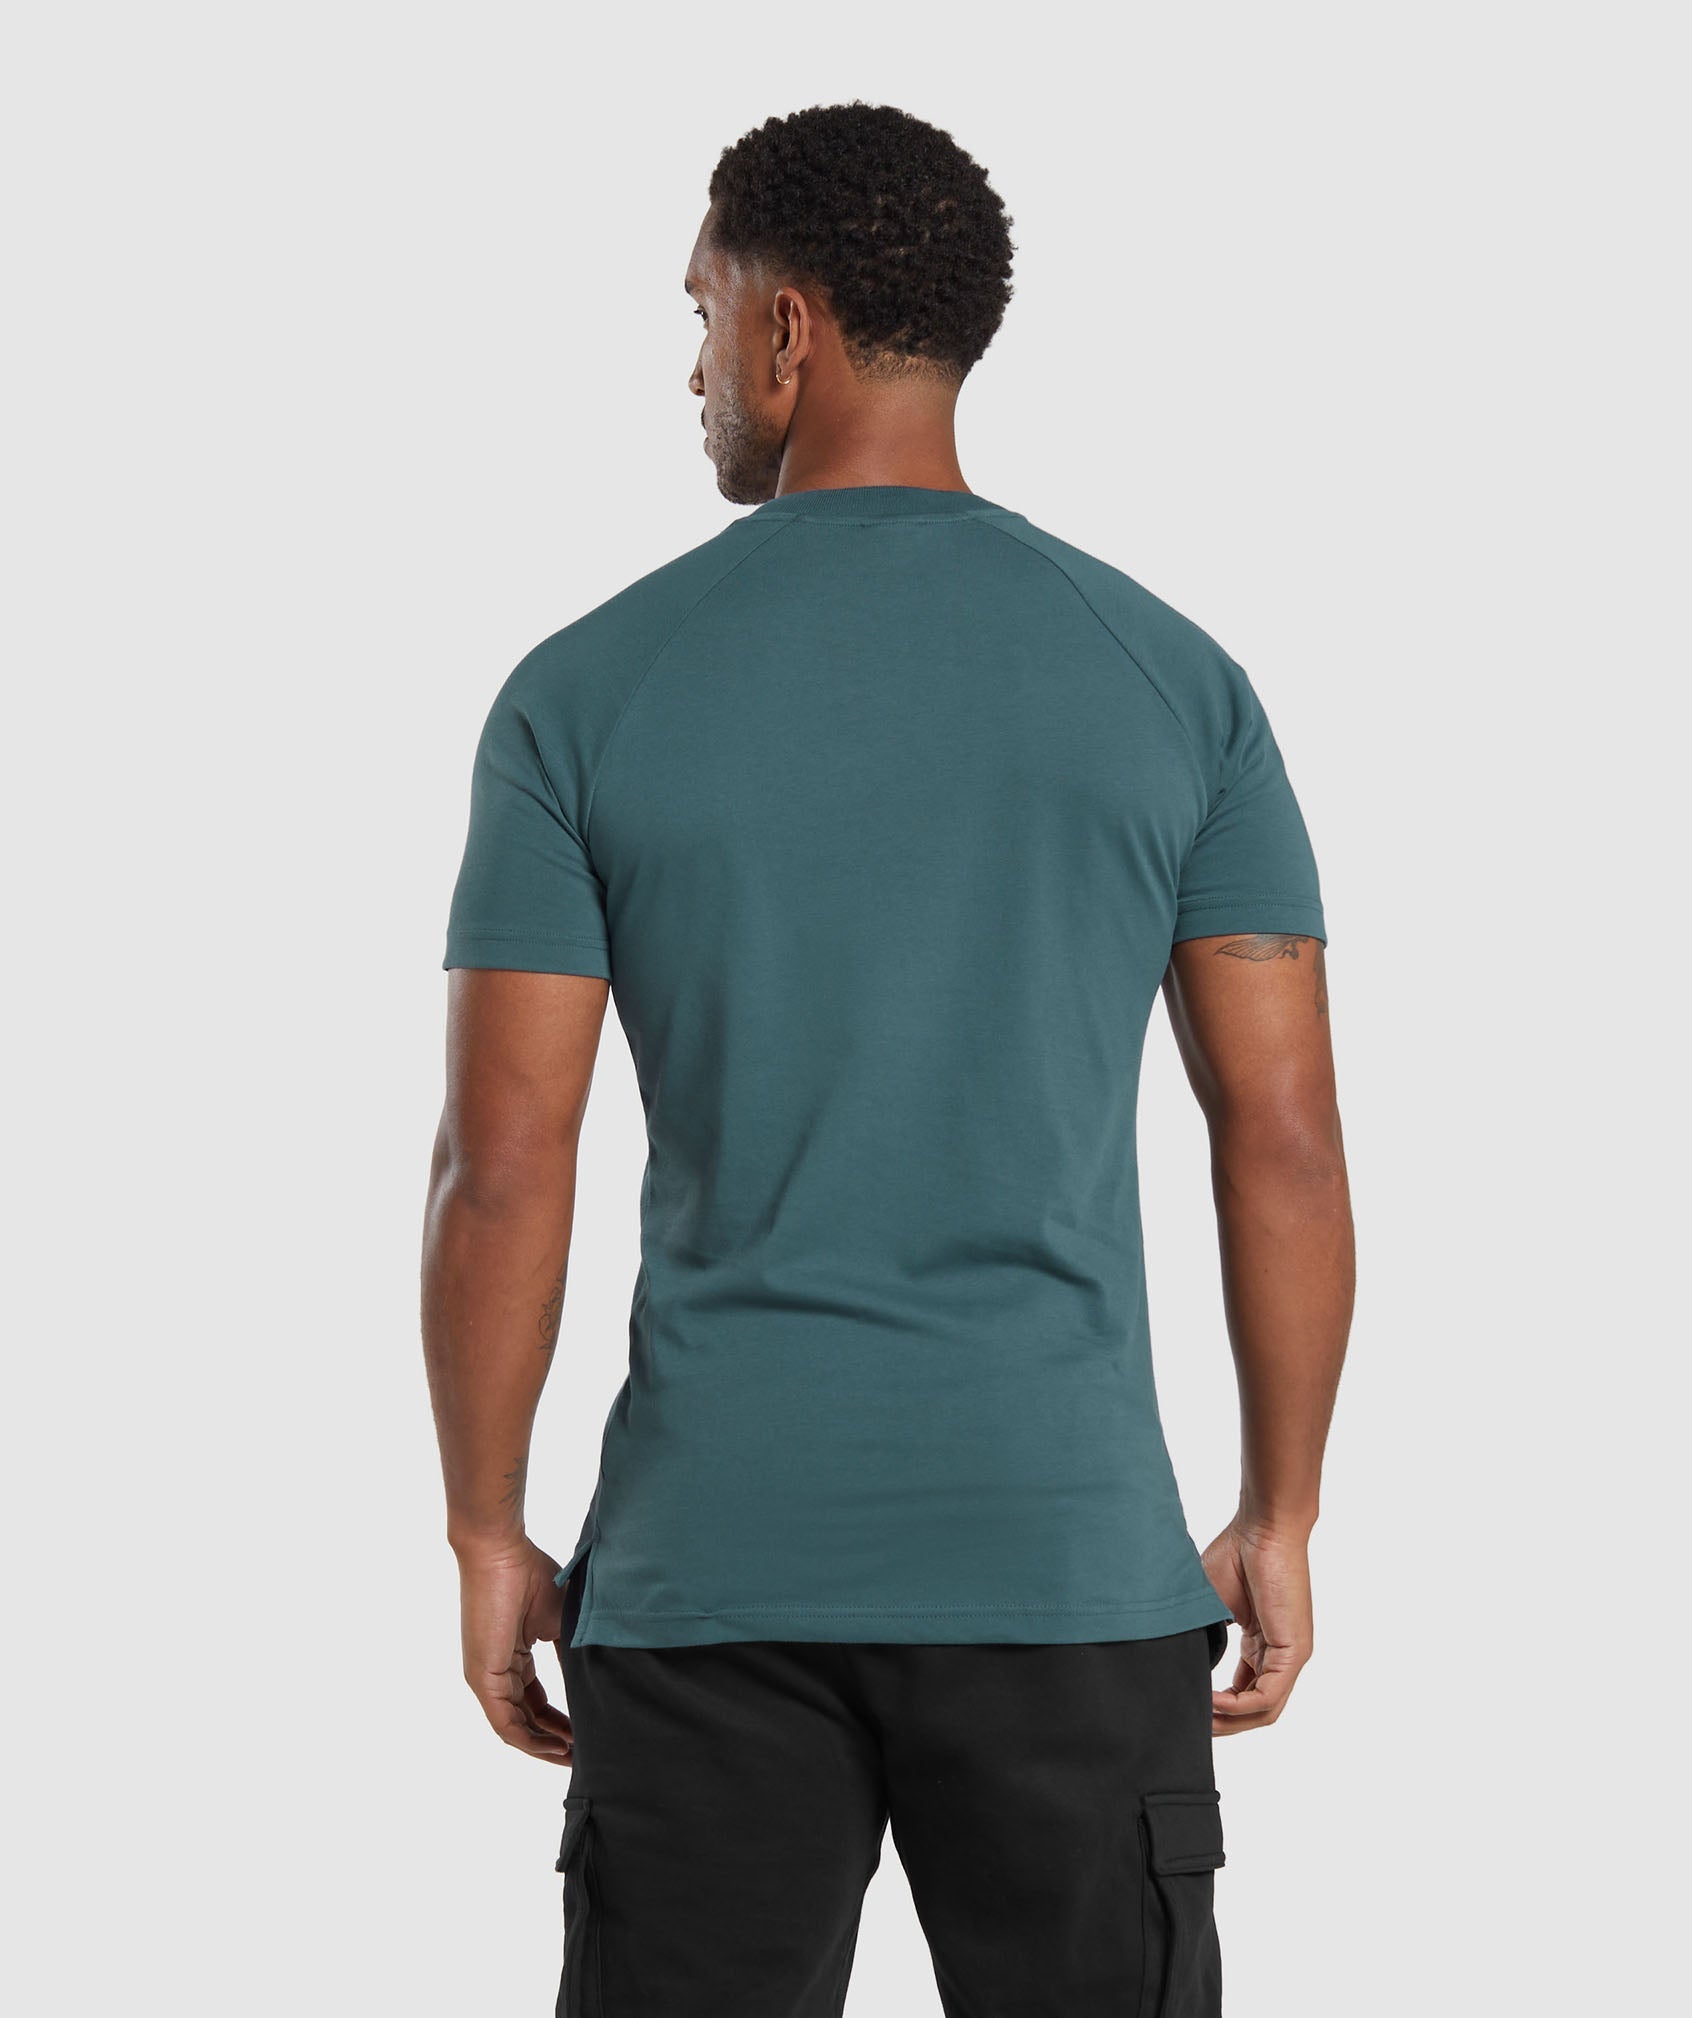 Rest Day Commute Polo Shirt in Smokey Teal - view 2